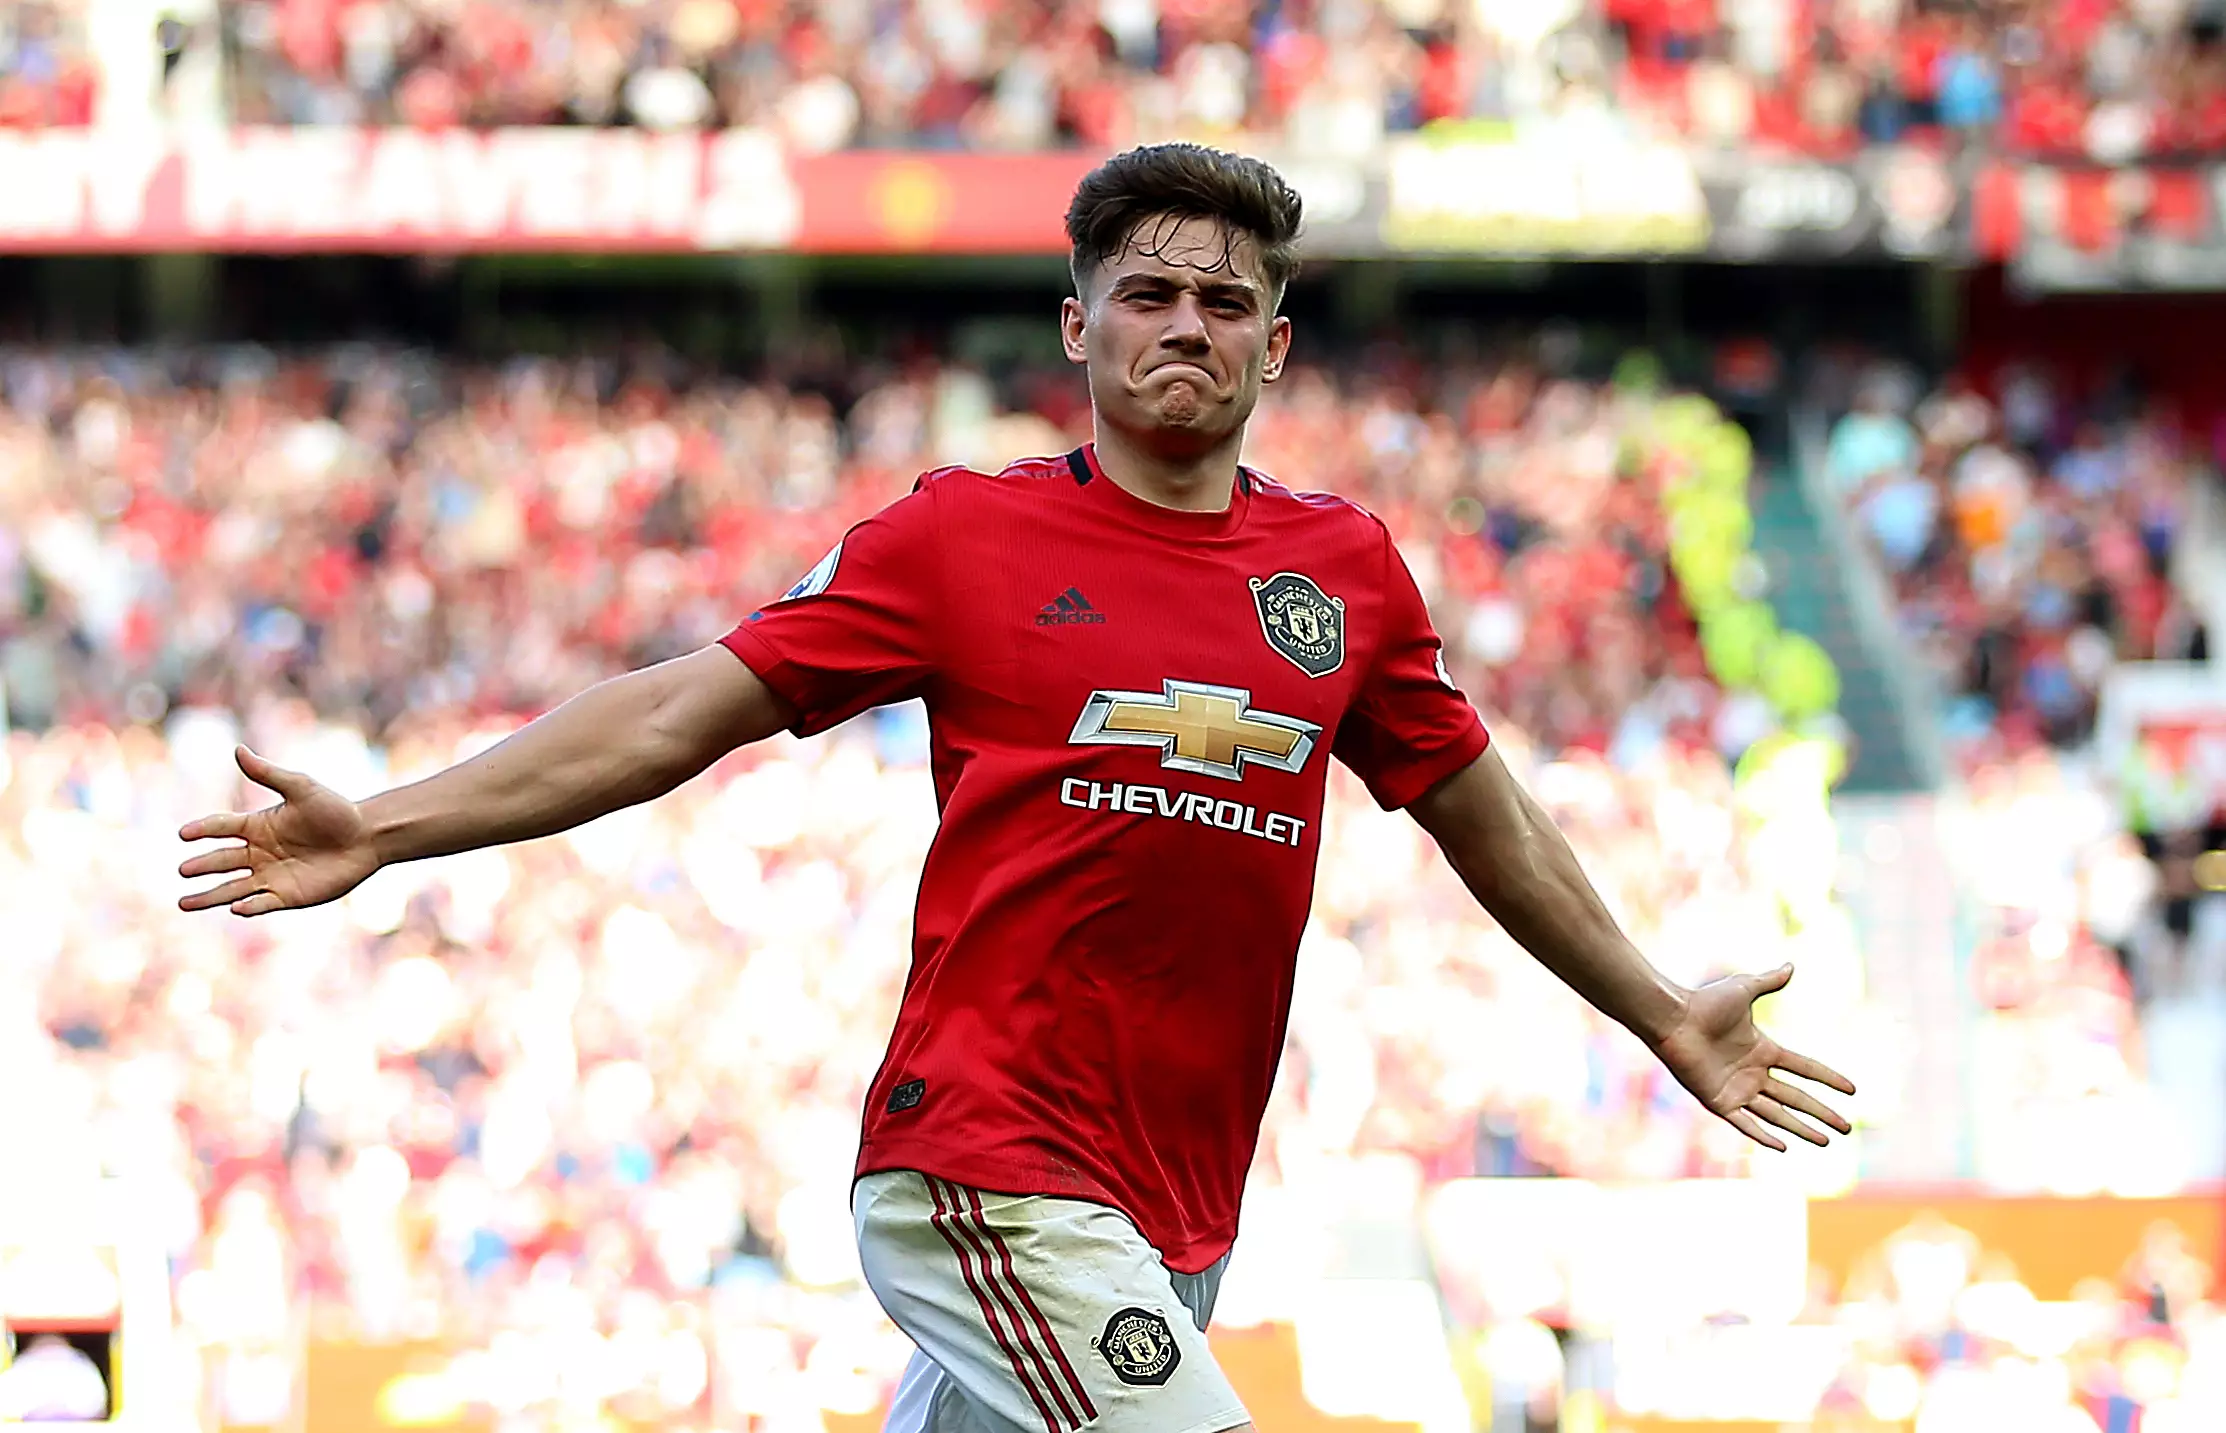 Daniel James has been one of United's best players this season, which isn't saying much. Image: PA Images